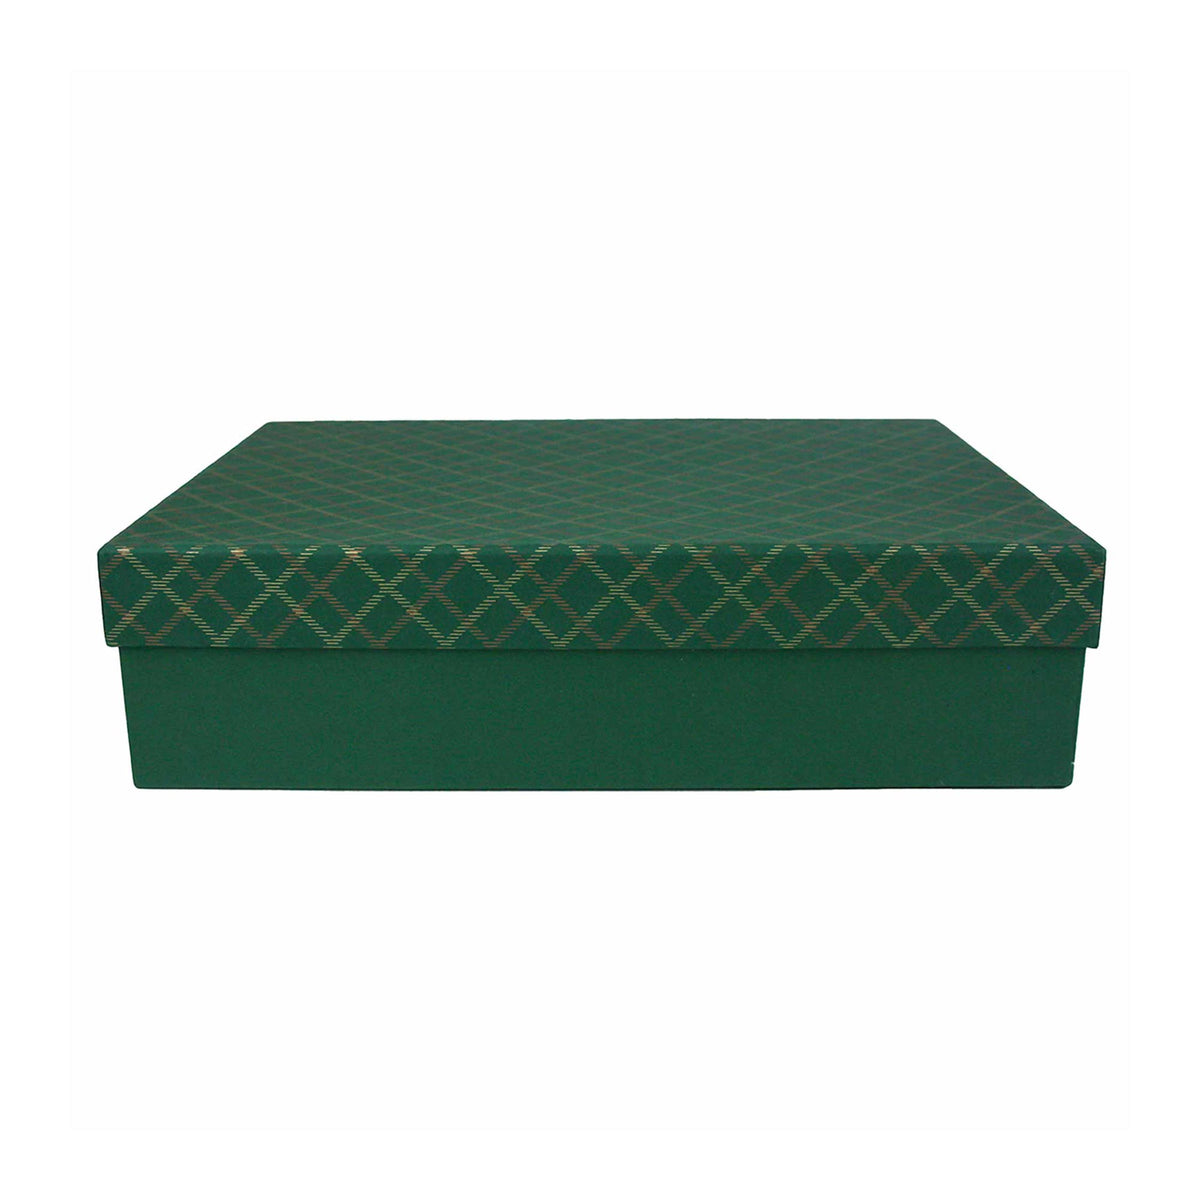 Single Handmade Green Chequered Gift Box (Sizes Available)